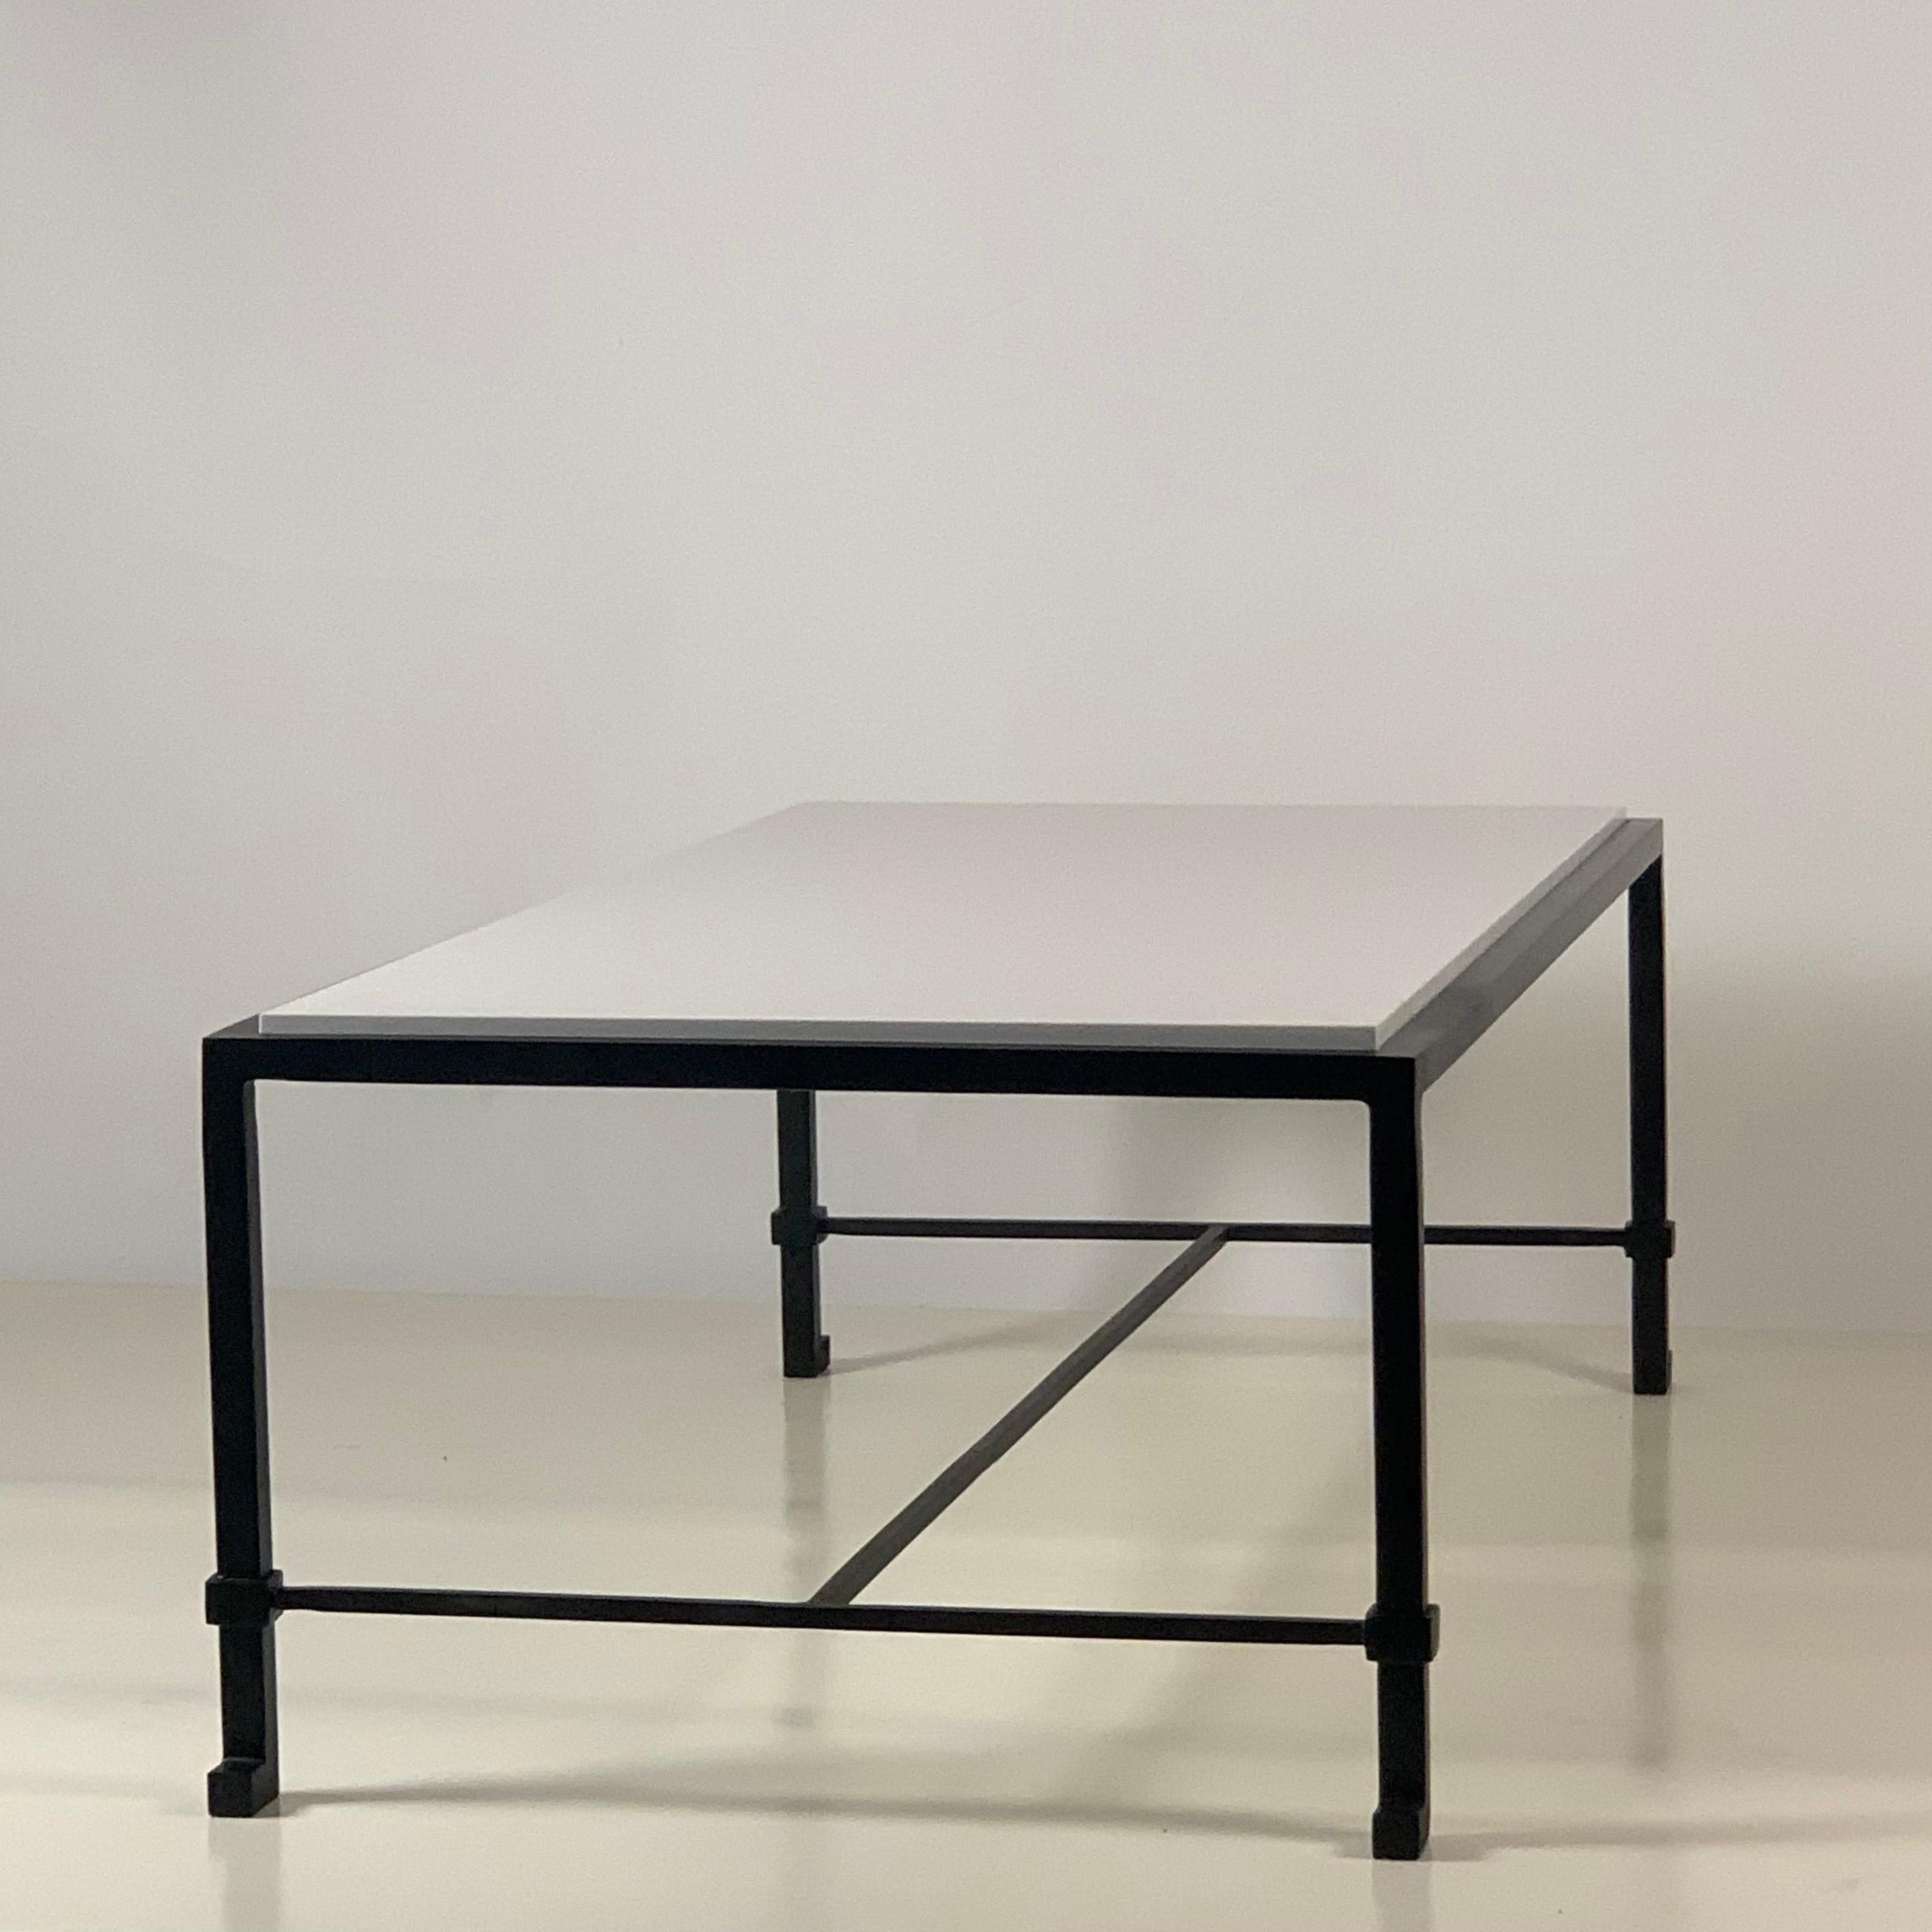 Chic 'Diagramme' Caesarstone Coffee Table by Design Frères In New Condition For Sale In Los Angeles, CA